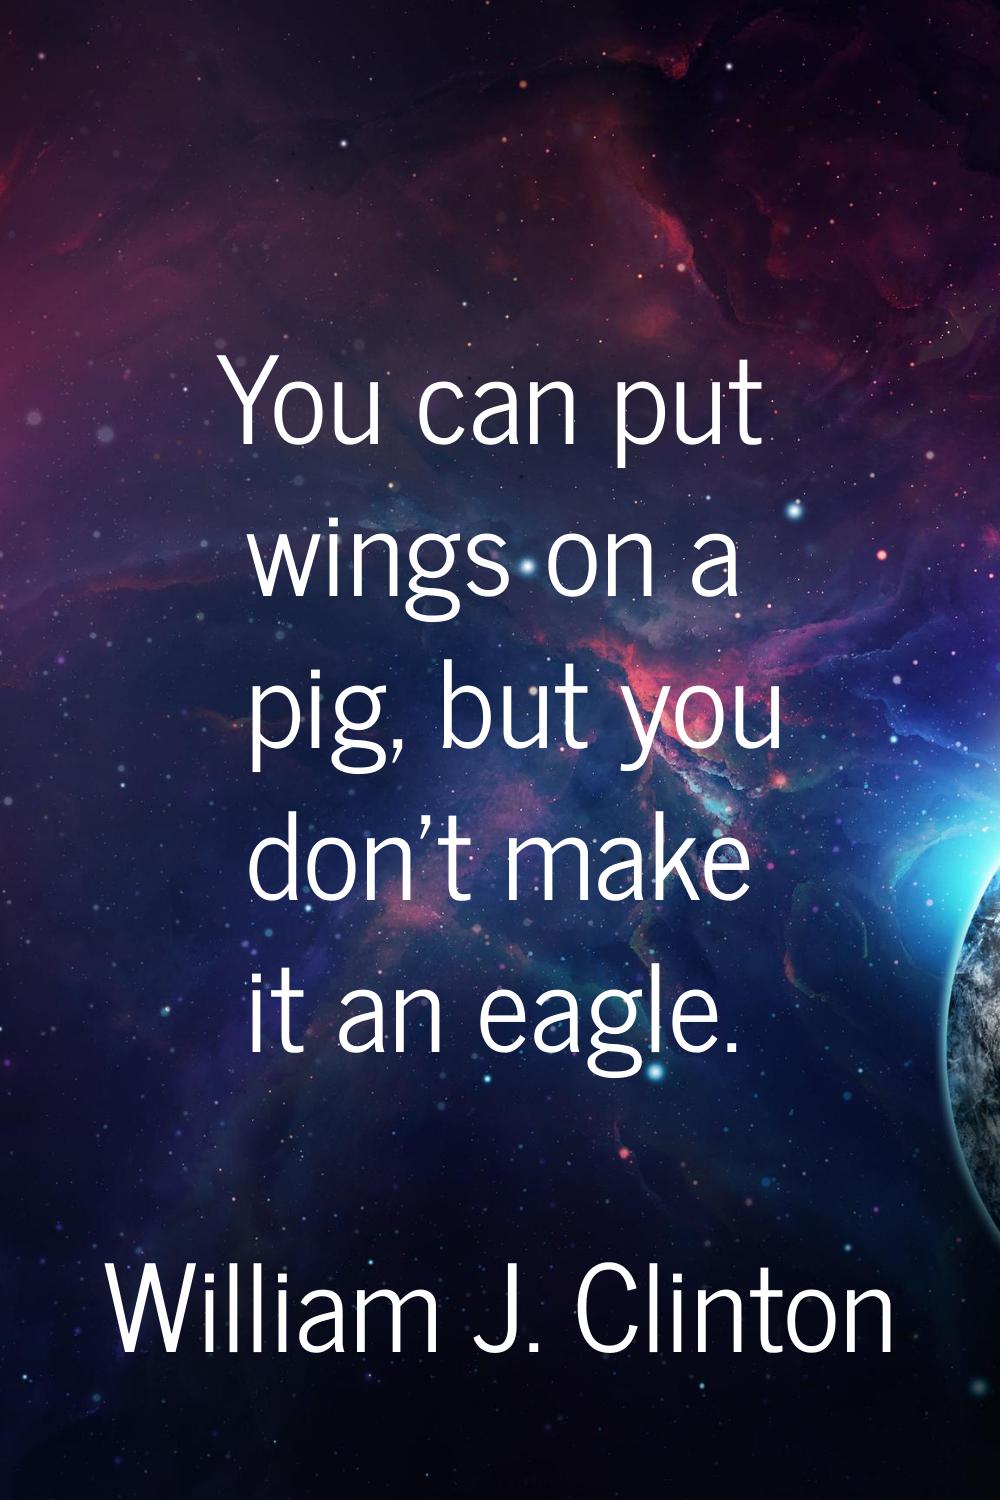 You can put wings on a pig, but you don't make it an eagle.